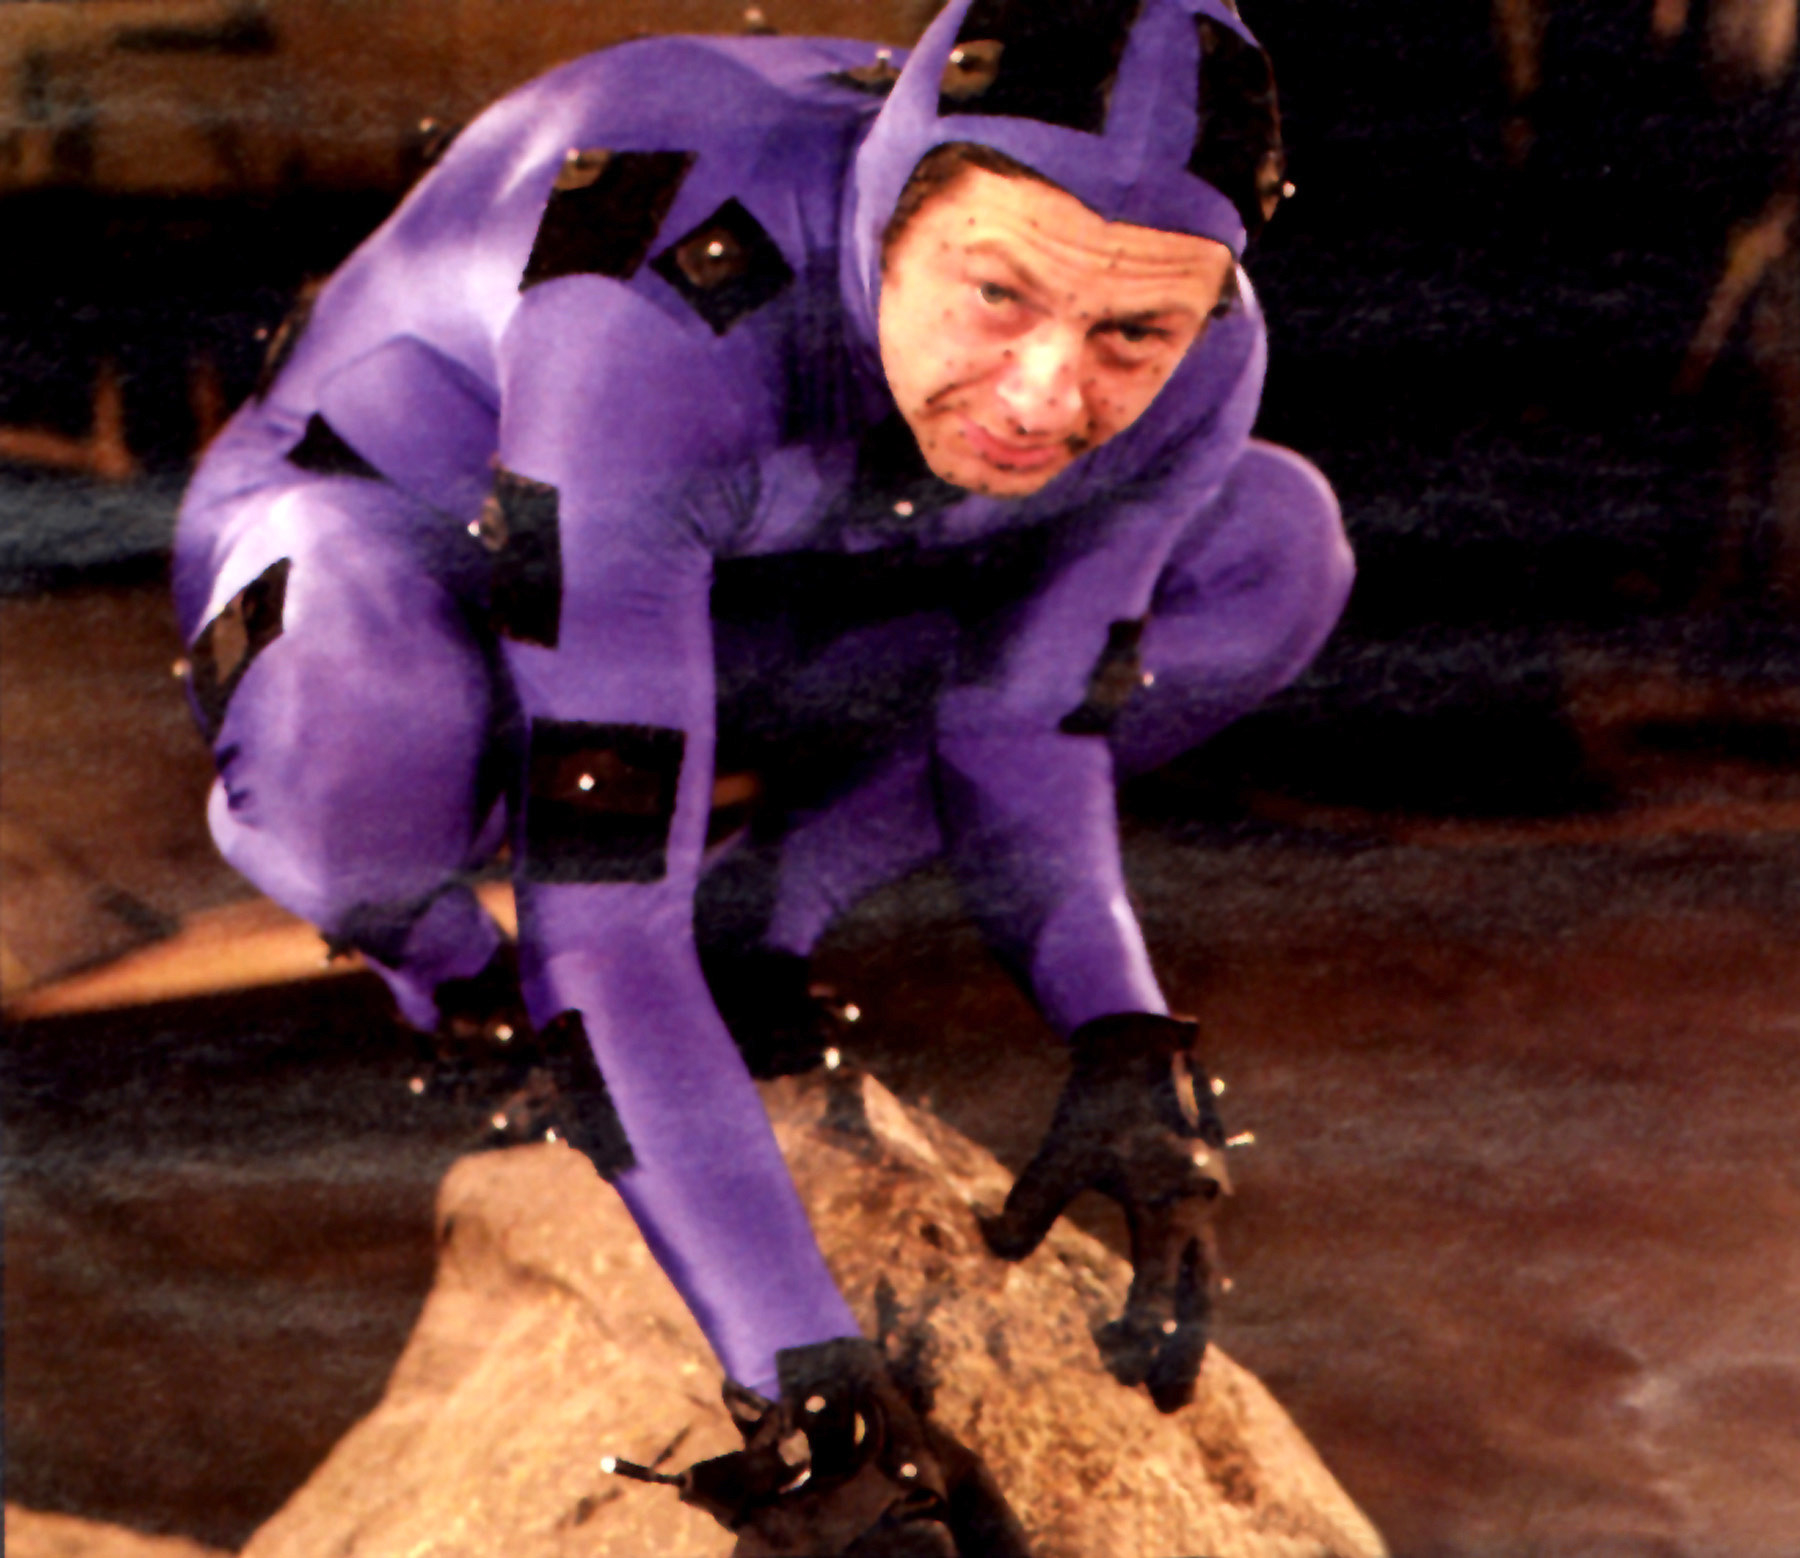 Andy Serkis in a purple suit